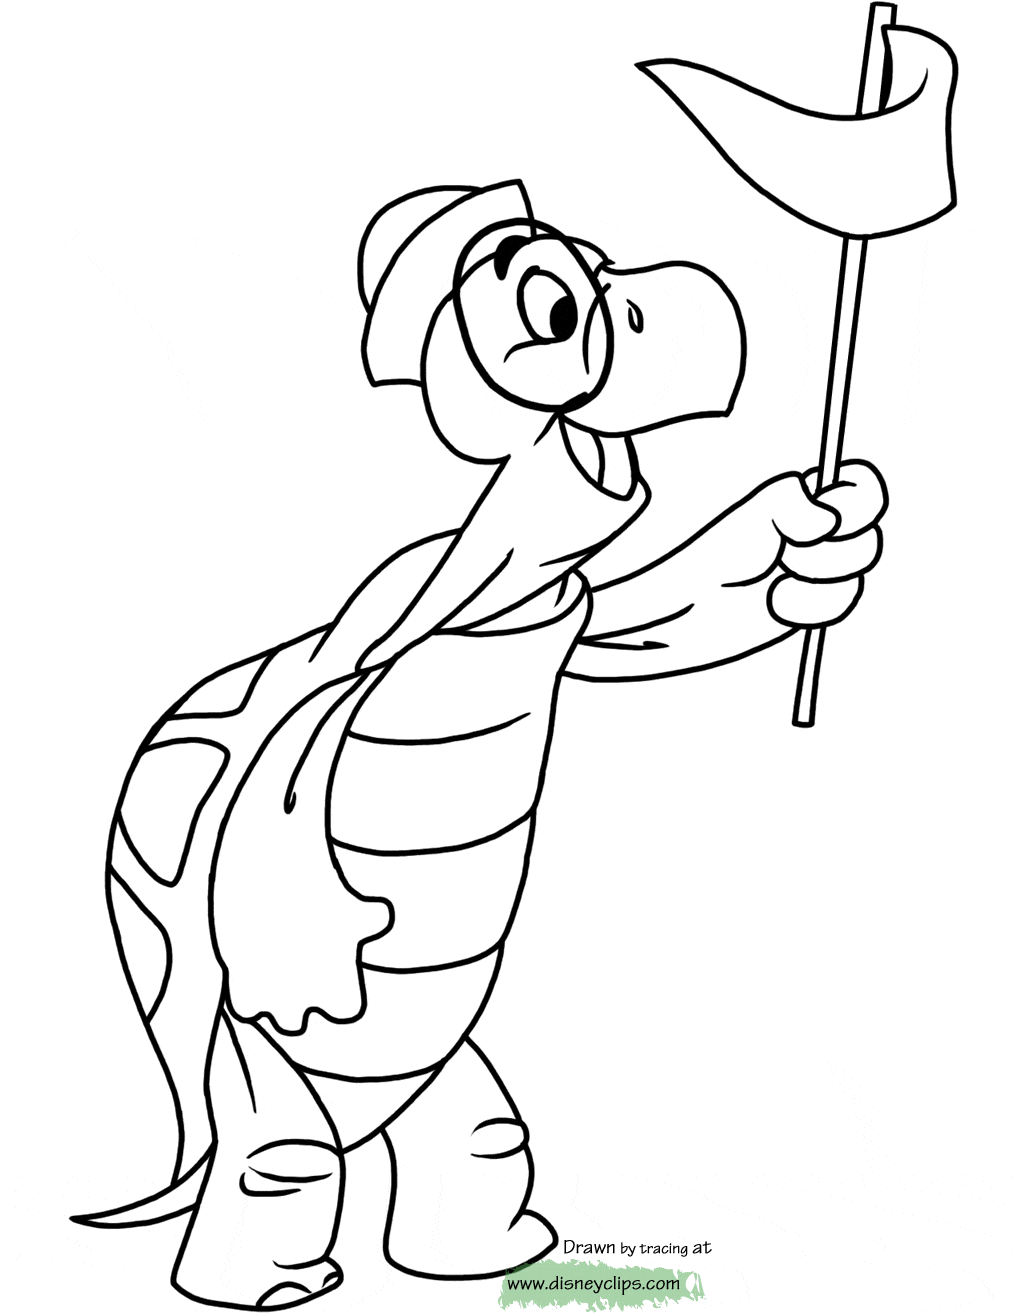 coloring page Toby waving a flag